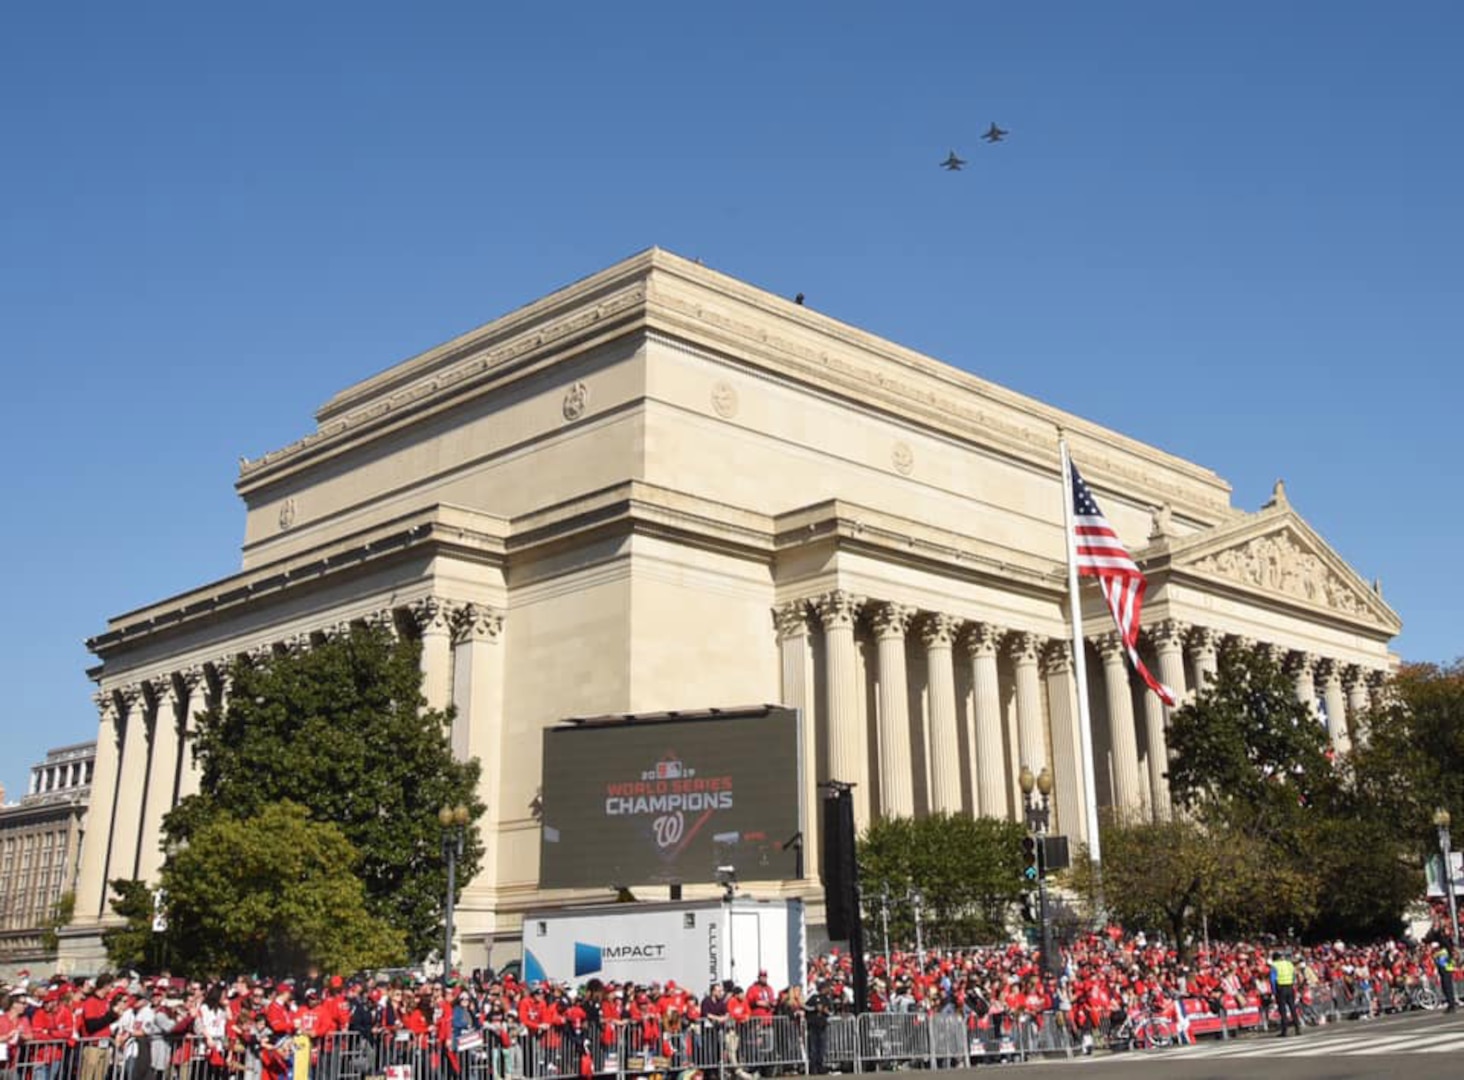 Two District of Columbia Air National Guard F-16’s from the 113th Wing fly high over the Washington Nationals victory parade in Washington, D.C., Nov. 2, 2019. The District of Columbia National Guard also provided military band performances and Civil Support Team assistance to aid District officials with the Nationals’ World Series parade.